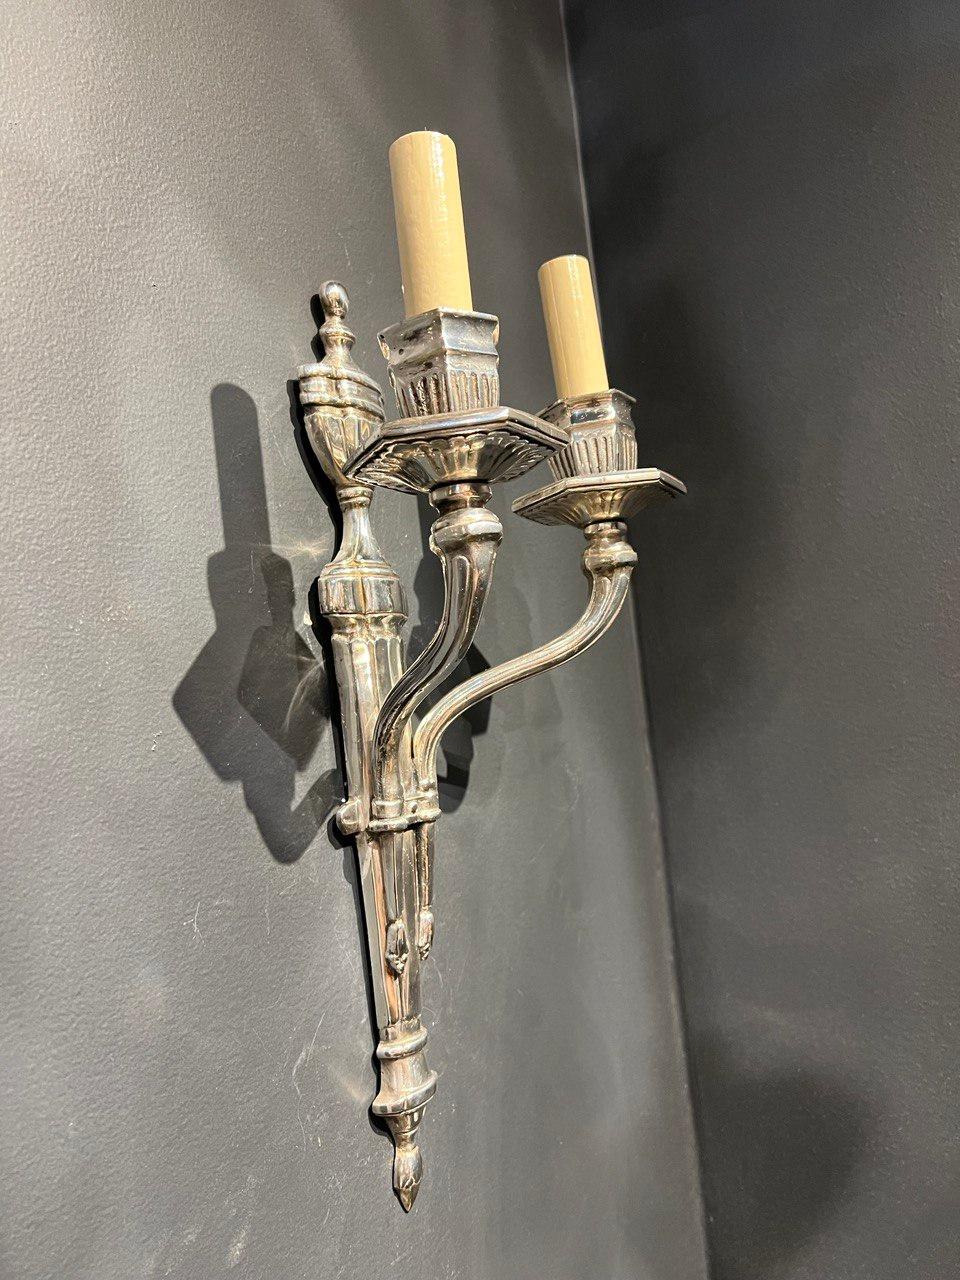 1920's Silver Plated Caldwell Sconces In Good Condition For Sale In New York, NY